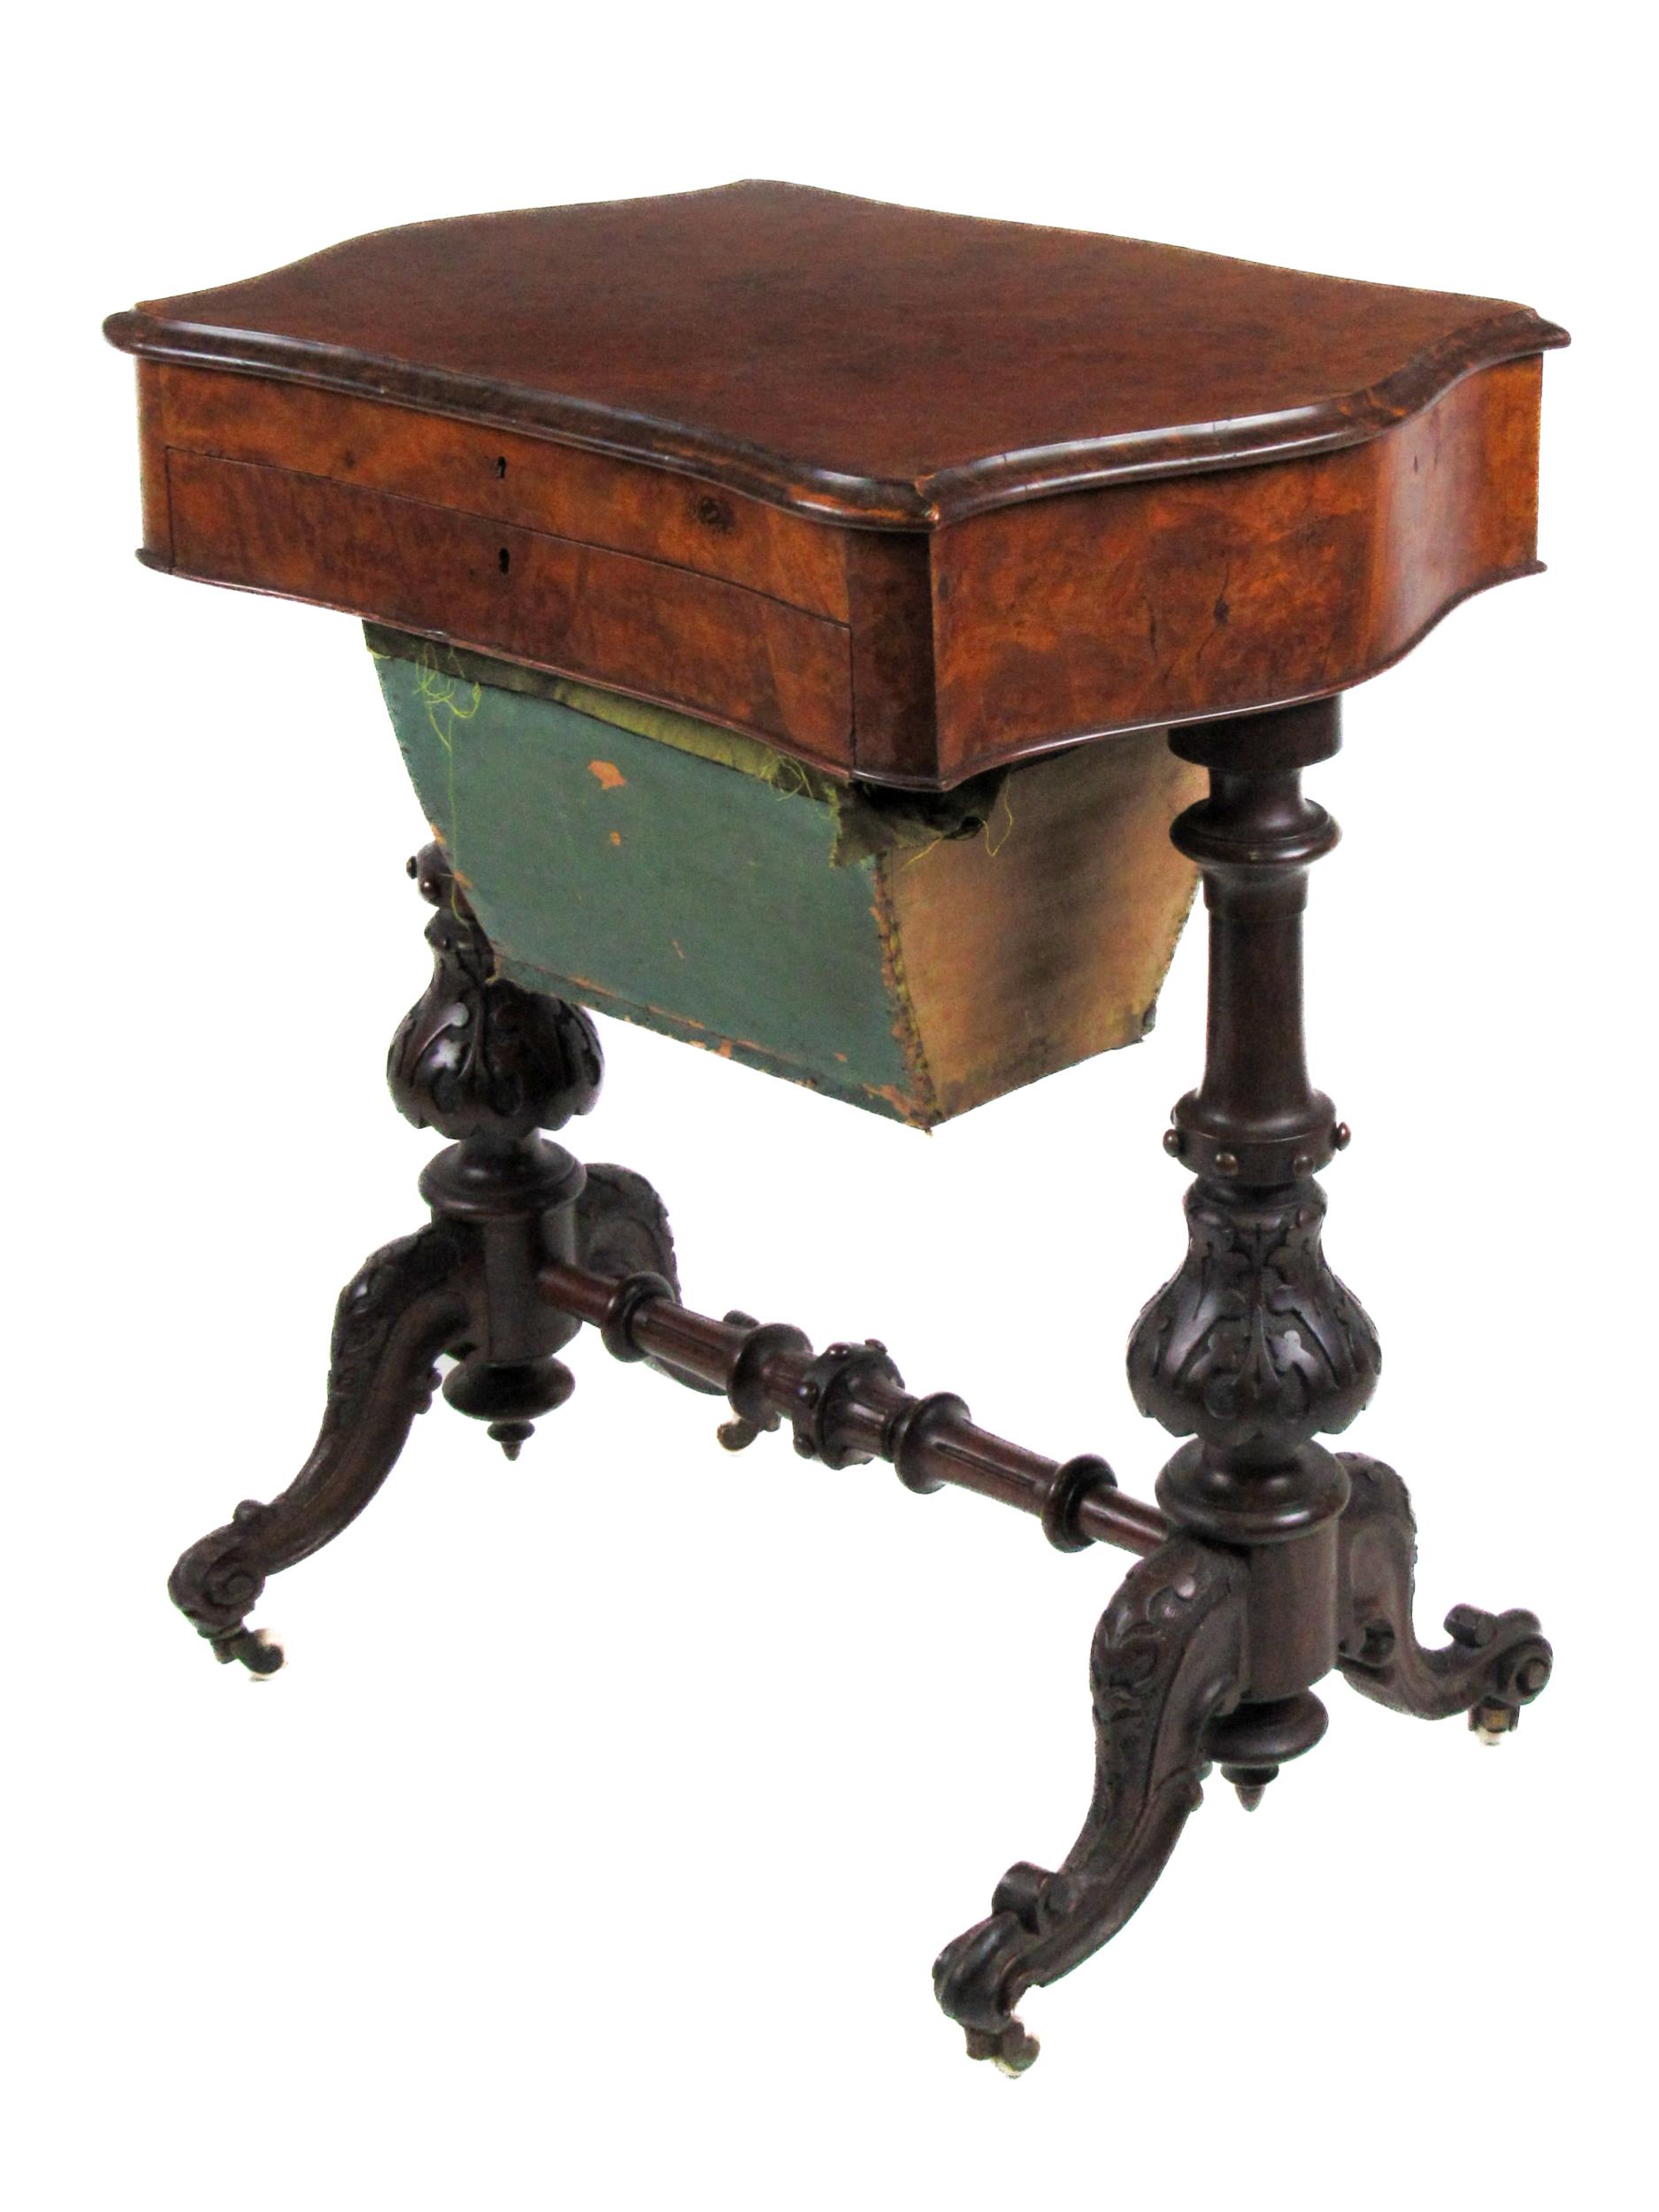 A Victorian serpentine shaped Ladies walnut Work / Writing Table, the hinged top opening to reveal a